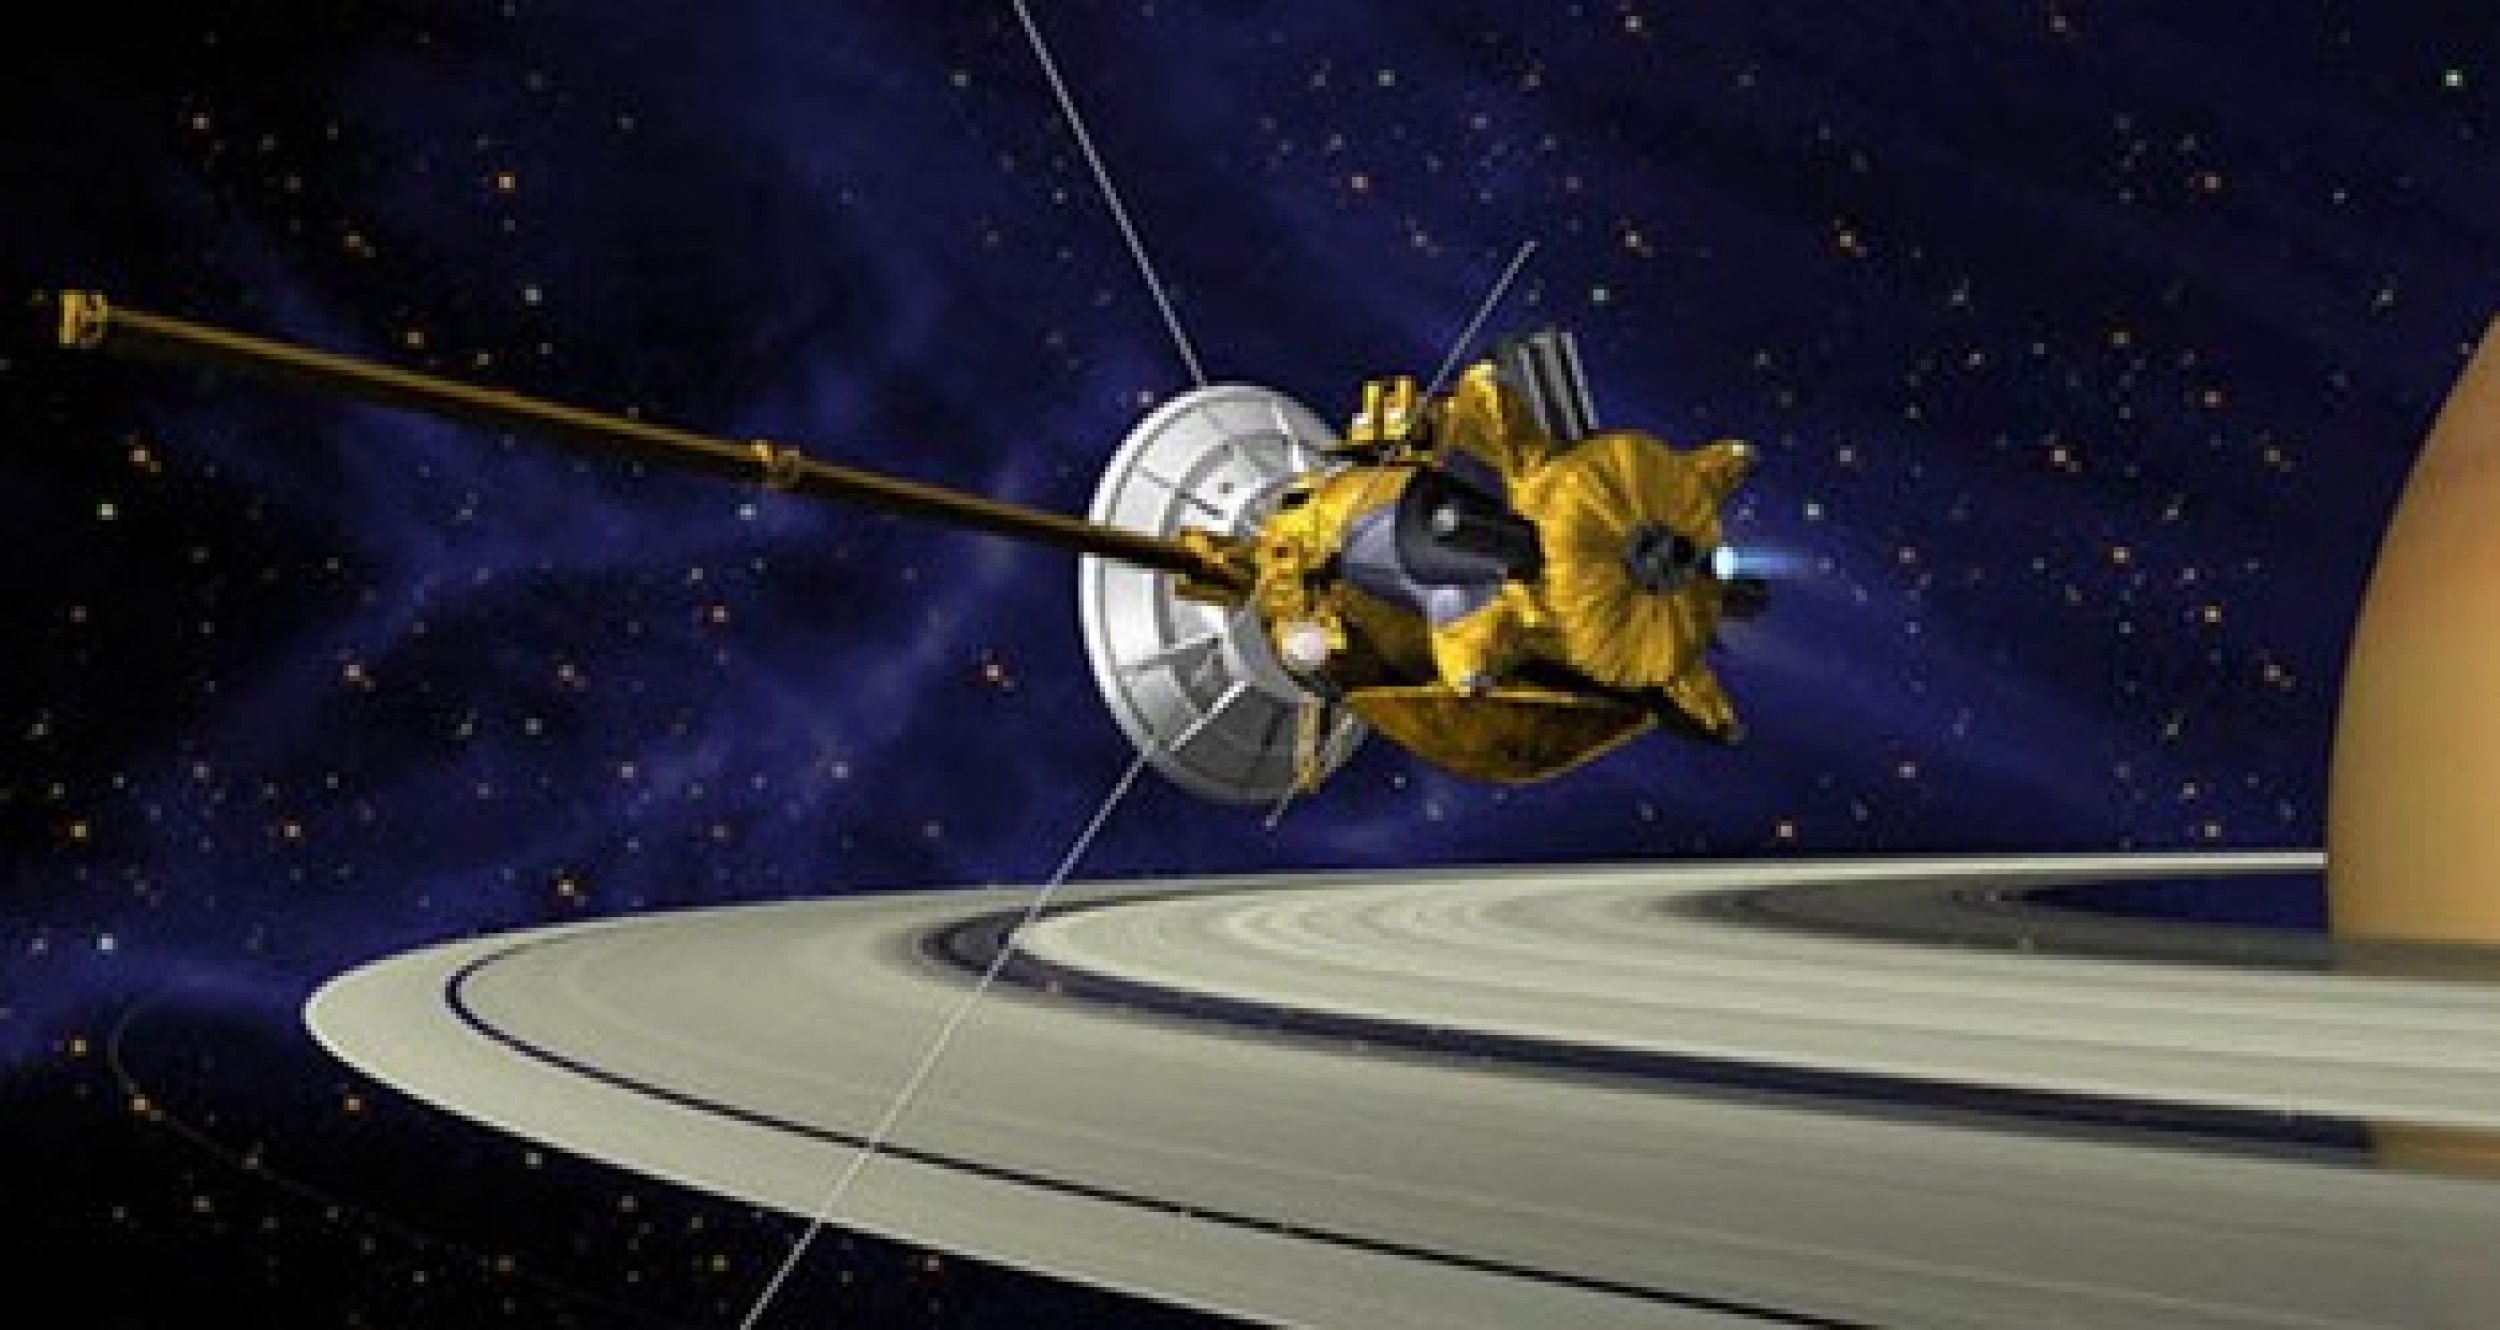 Mission managers for NASA039s Cassini spacecraft suspended operation of the Cassini plasma spectrometer instrument on Tuesday, June 14, 2011